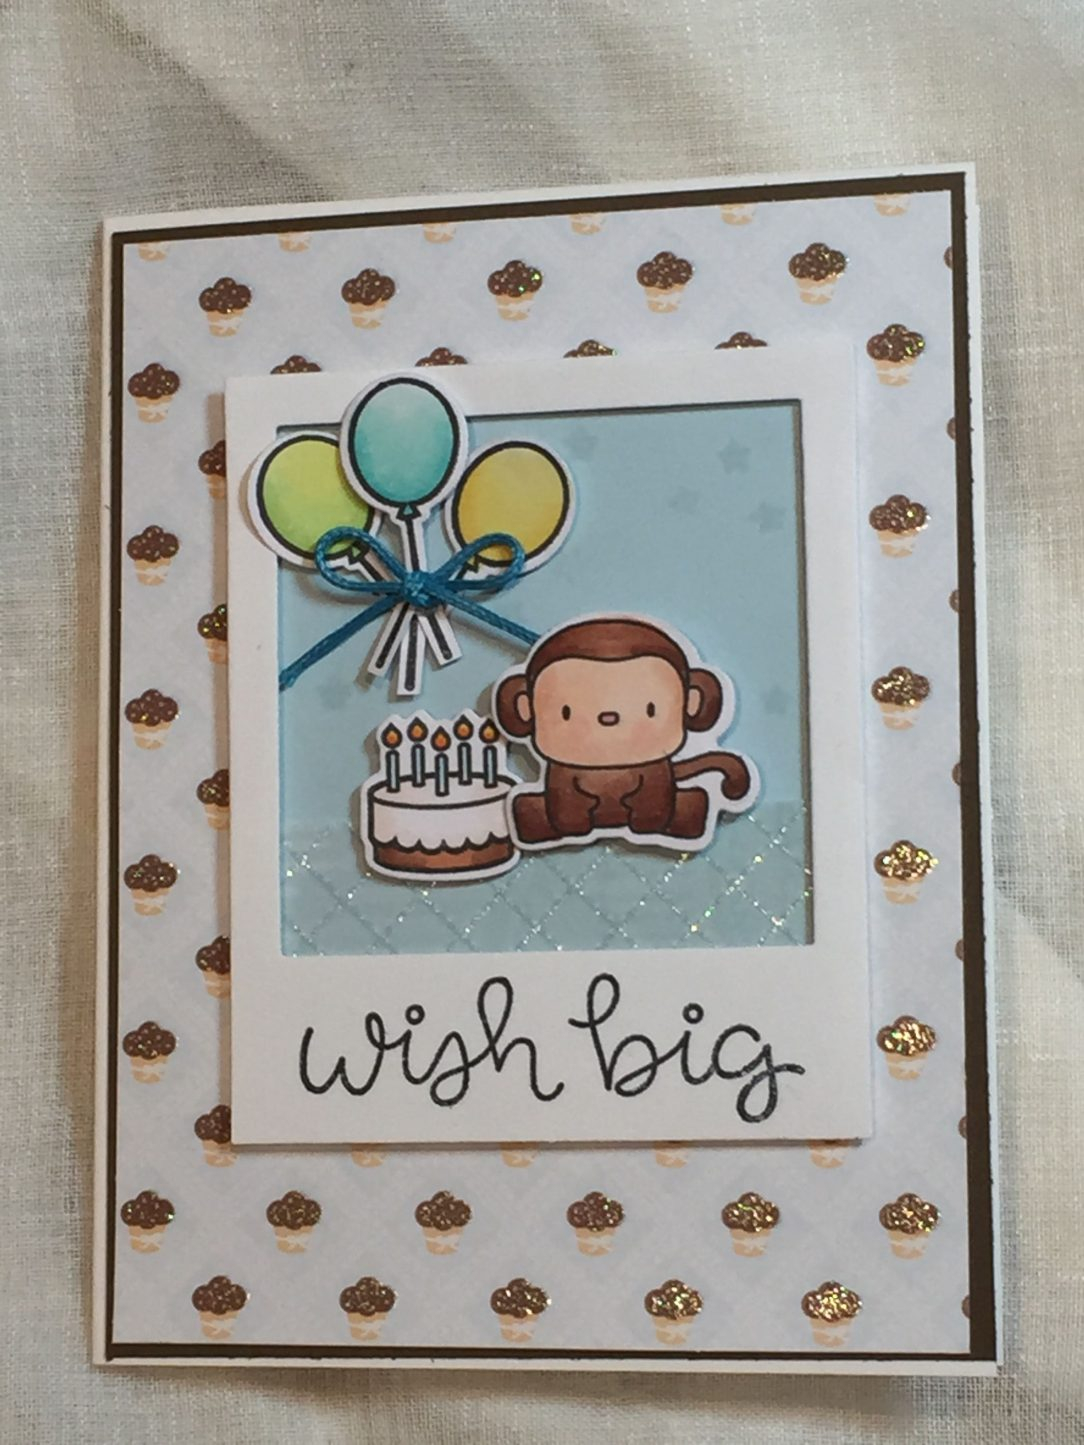 Big Birthday Card Ideas Big Birthday Cards In Stores For Dad Girlfriend A Sister Envelopes